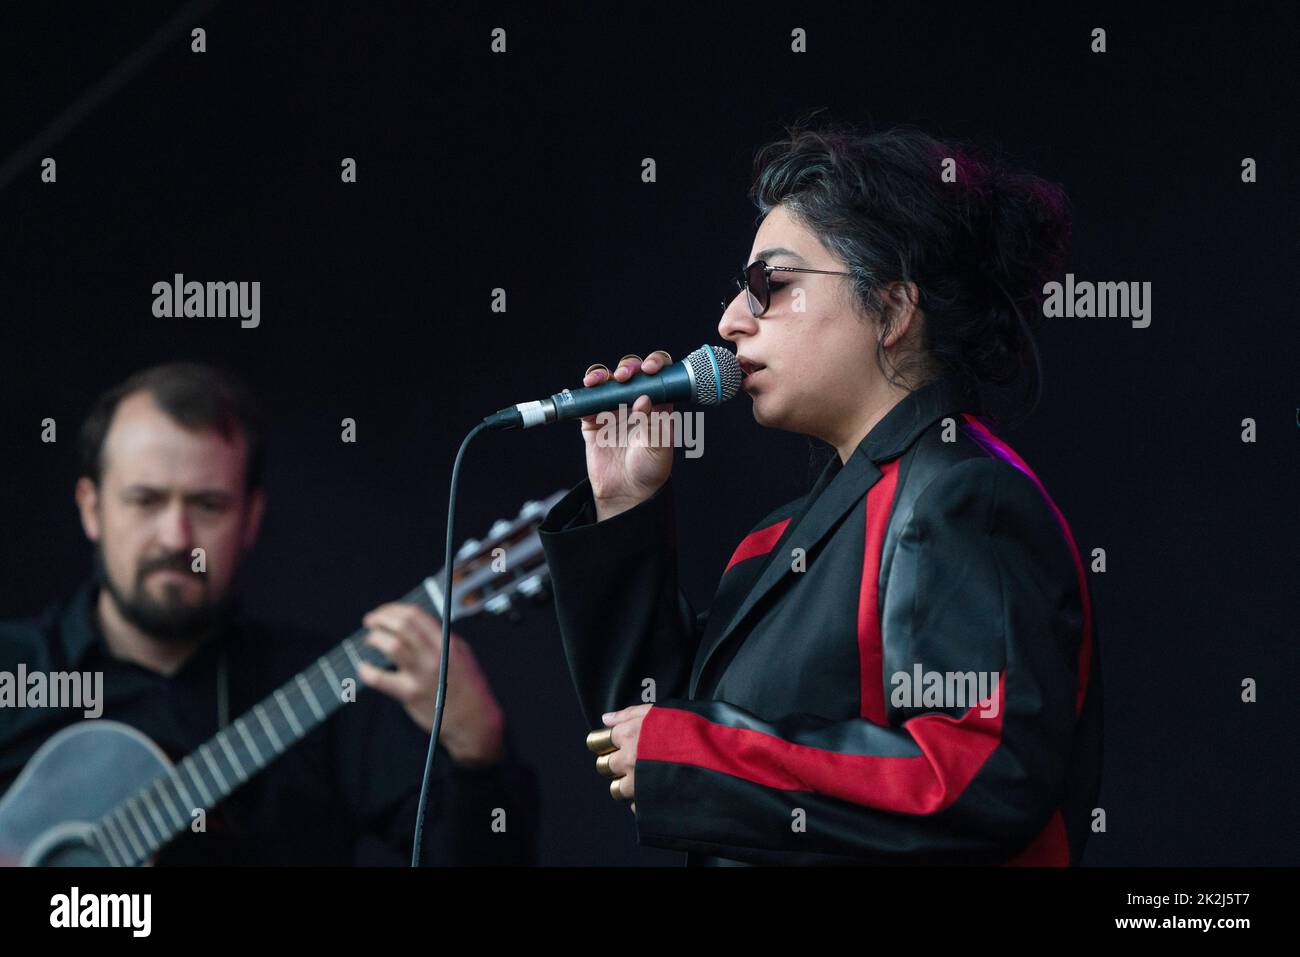 Grammy winner Arooj Aftab plays the Walled Garden Stage at the Green Man 2022 music festival in Wales, UK. Photo: Rob Watkins/Alamy Stock Photo